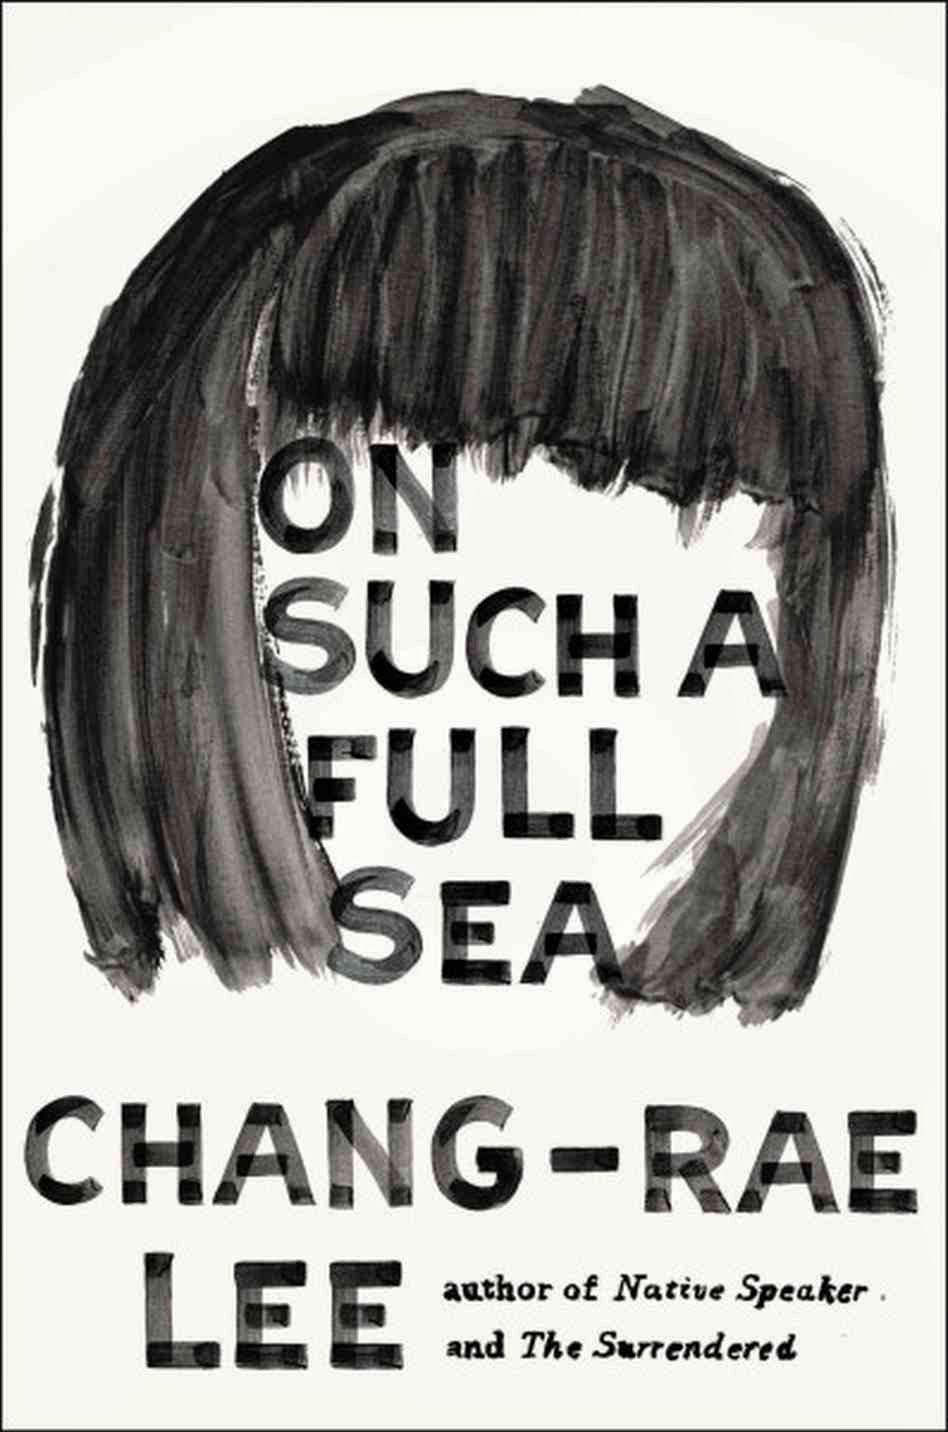 http://discover.halifaxpubliclibraries.ca/?q=title:on%20such%20a%20full%20sea